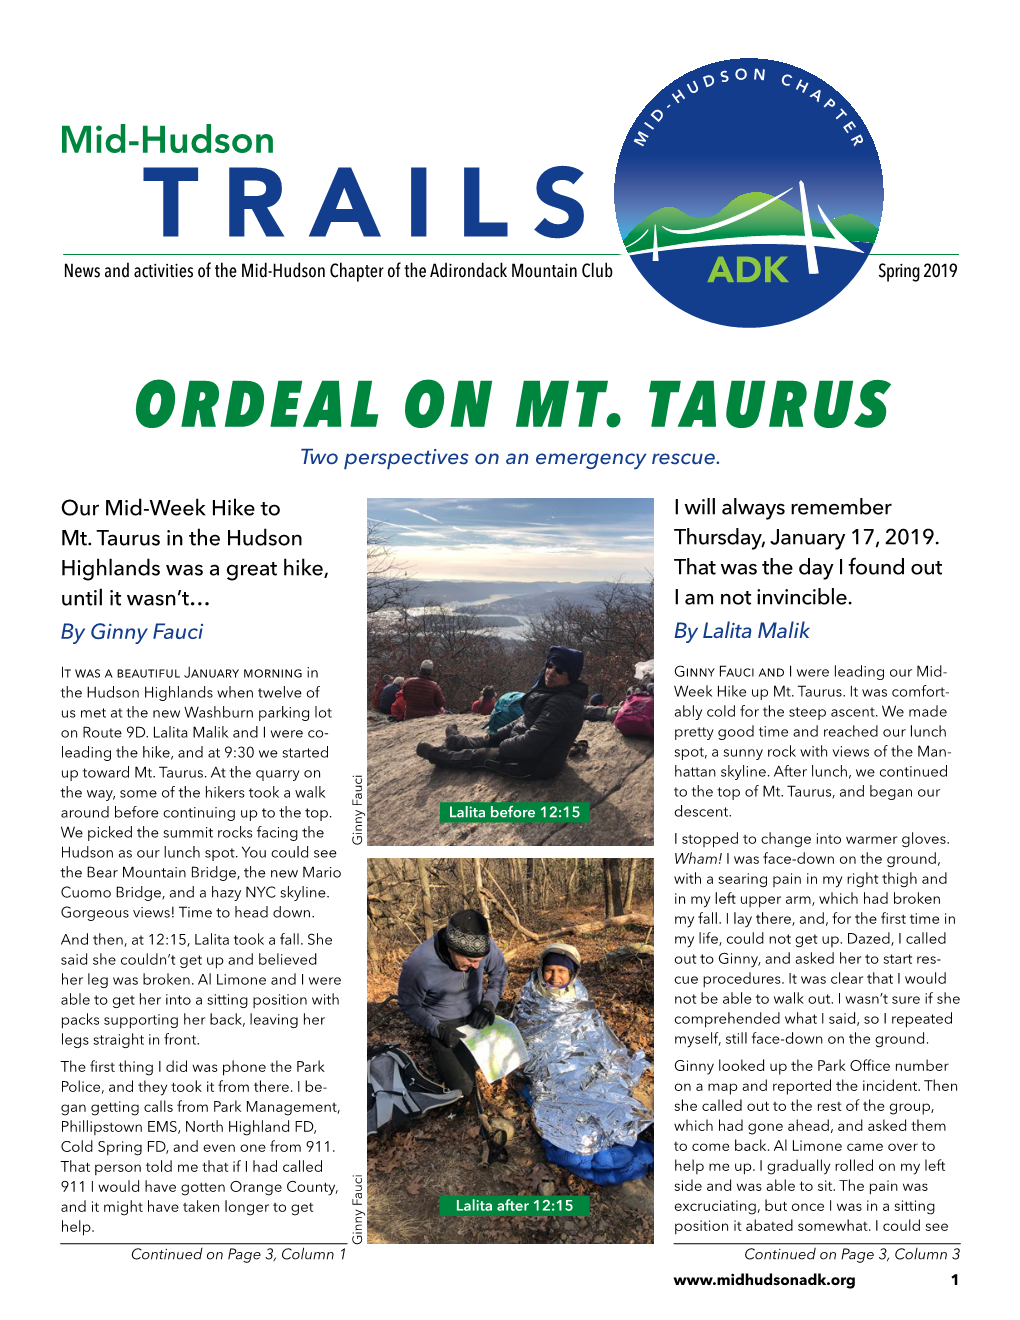 TRAILS of the Mid-Hudson Chapter of the Adirondack Mountain Club ADK Spring 2019